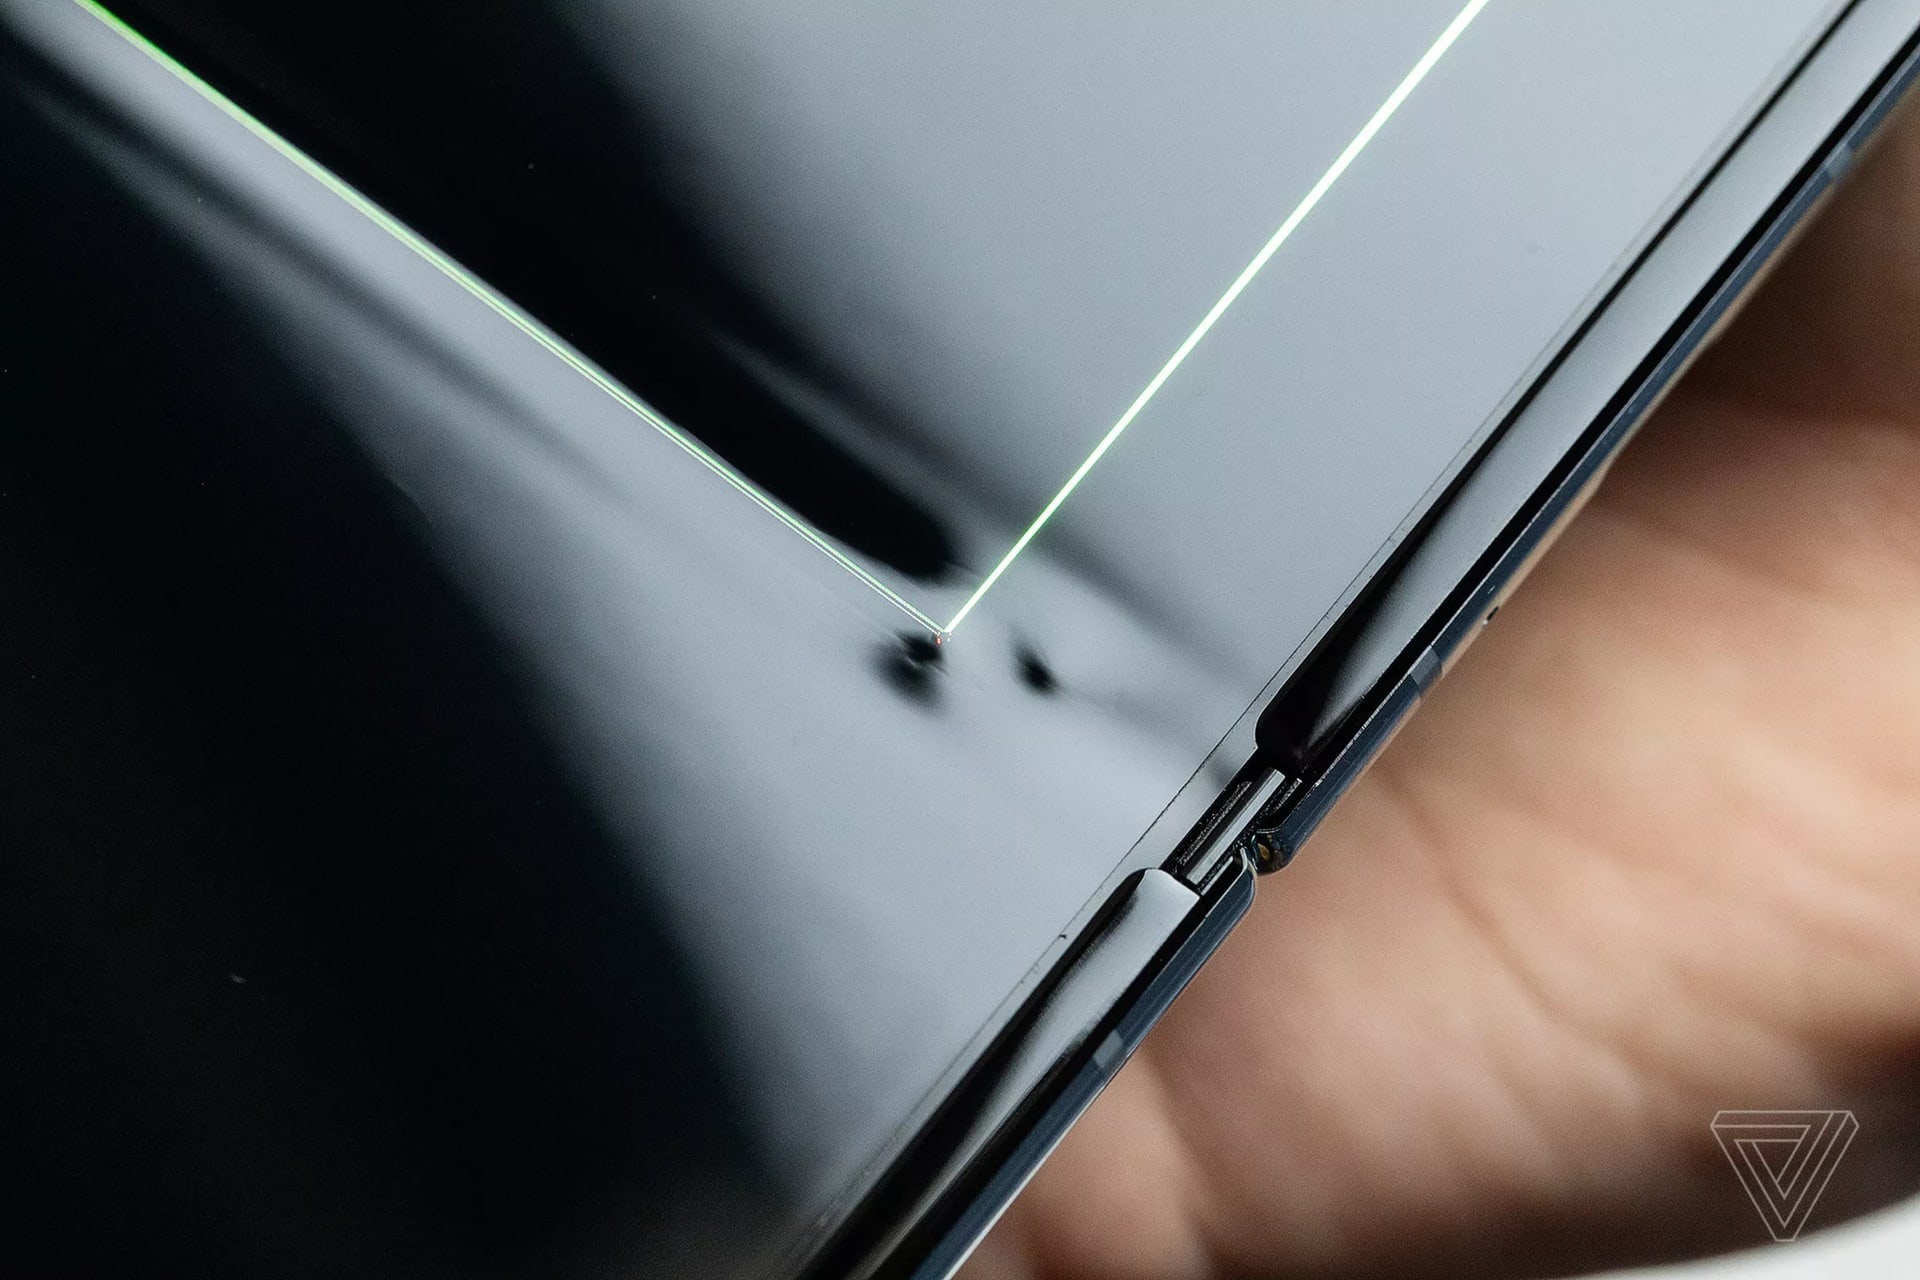 The Samsung Galaxy Fold up close and with a bump under the display.